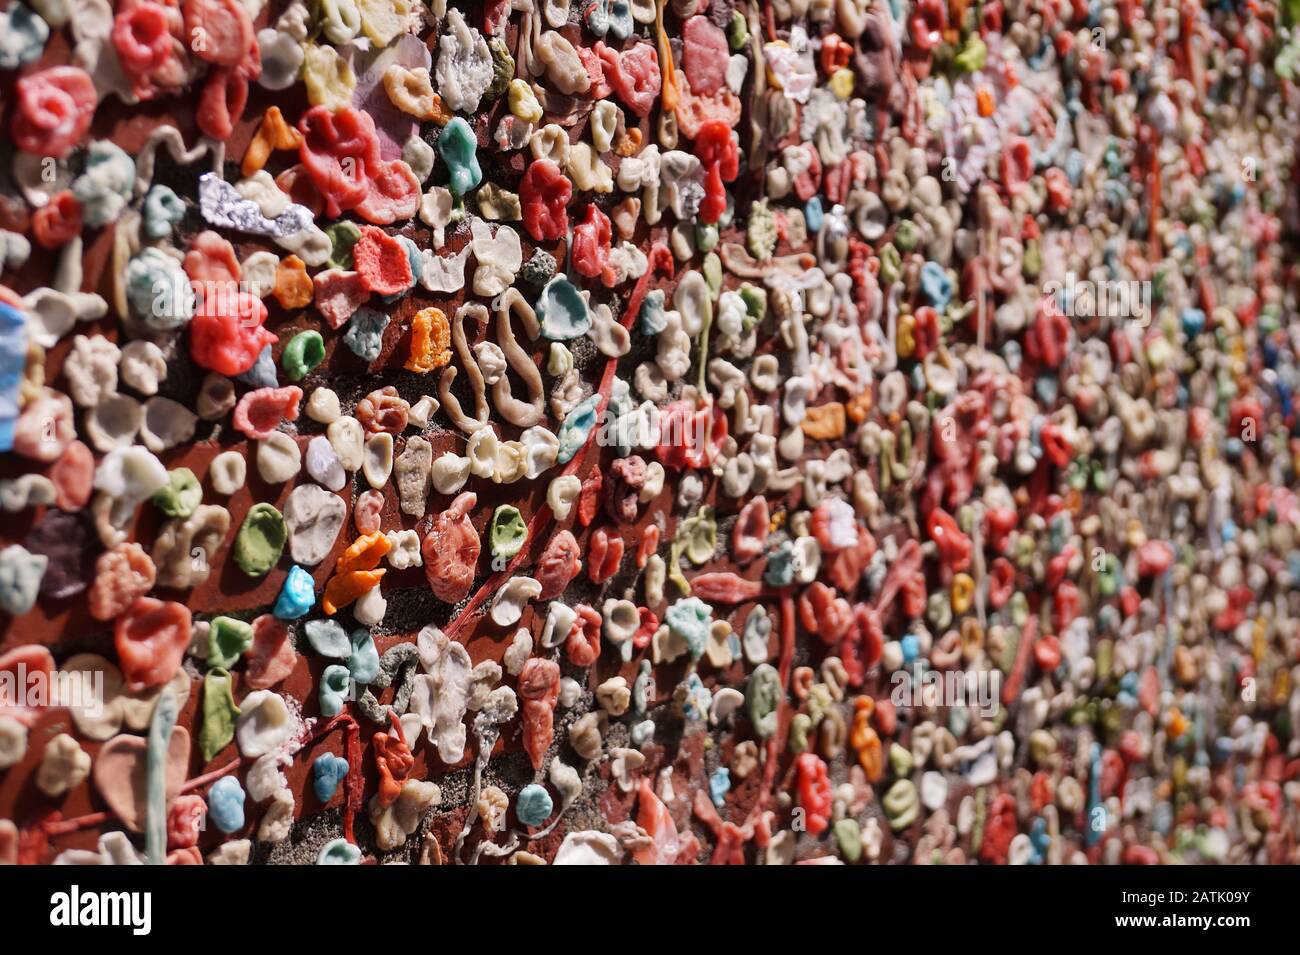 Gum wall. Chewing gums stuck to the wall. One of the tourist attractions  in Post Alley in Downtown Seattle. Stock Photo